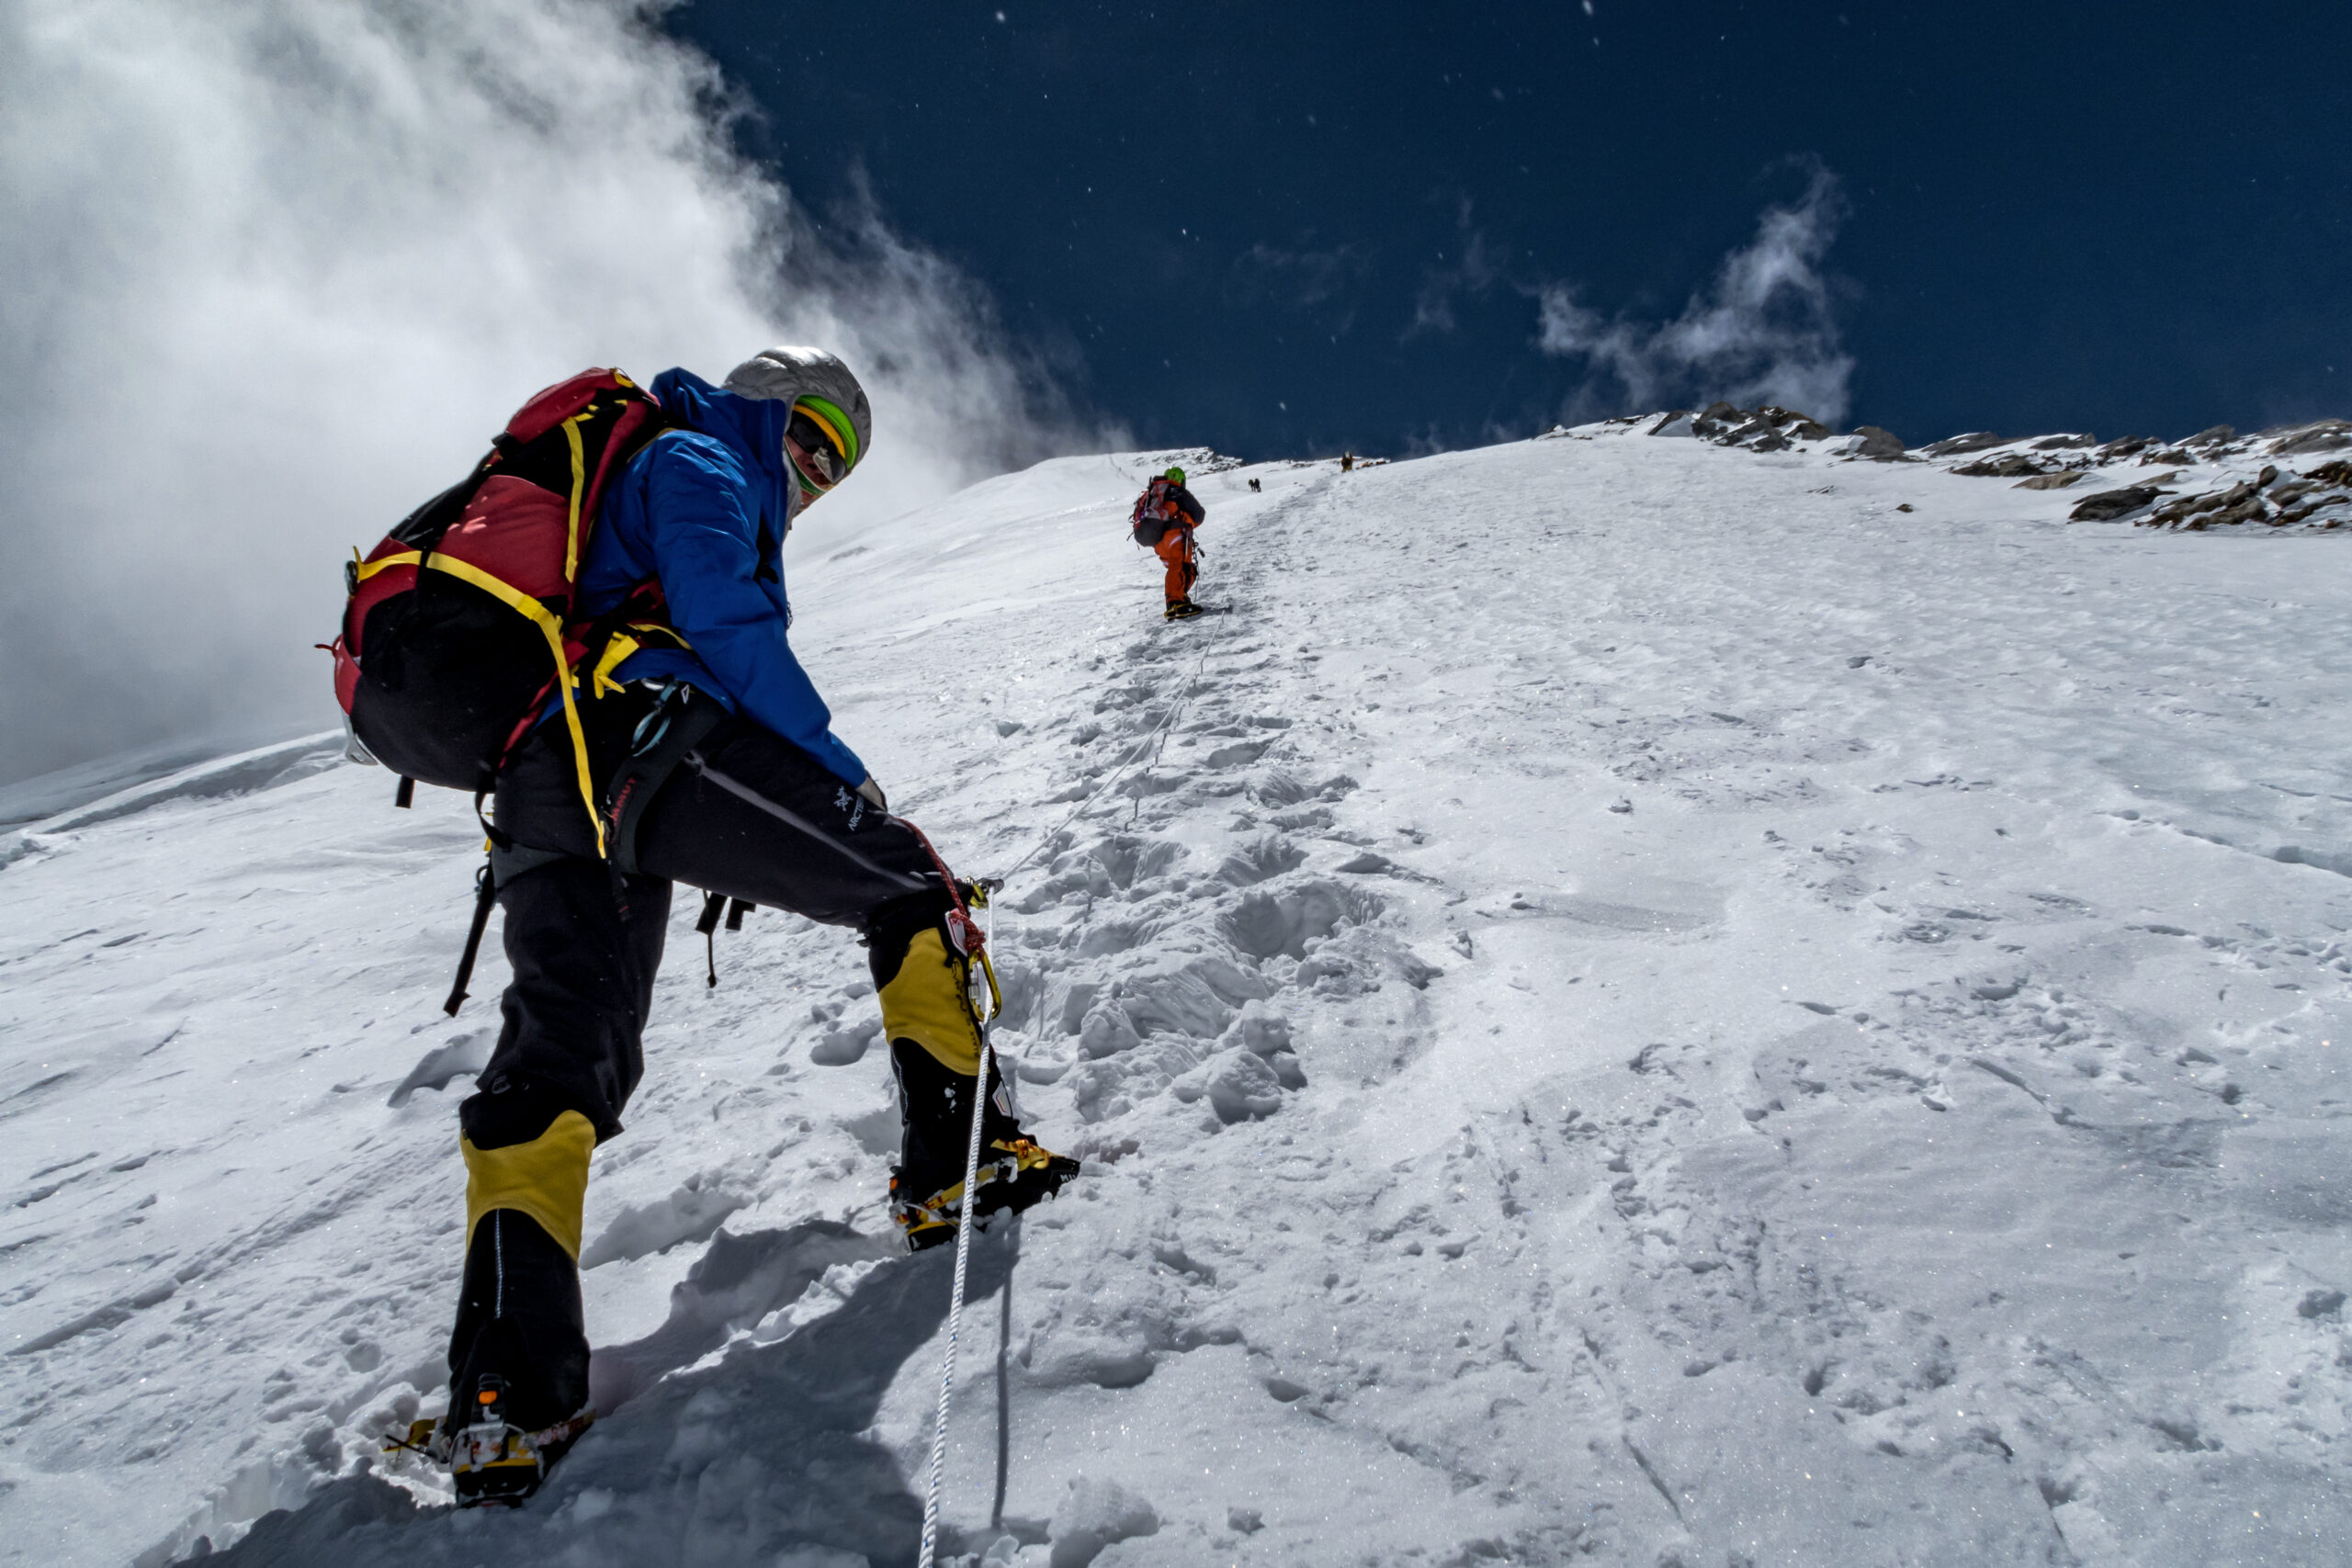 63 mountaineers granted permits for spring Mt Everest expedition